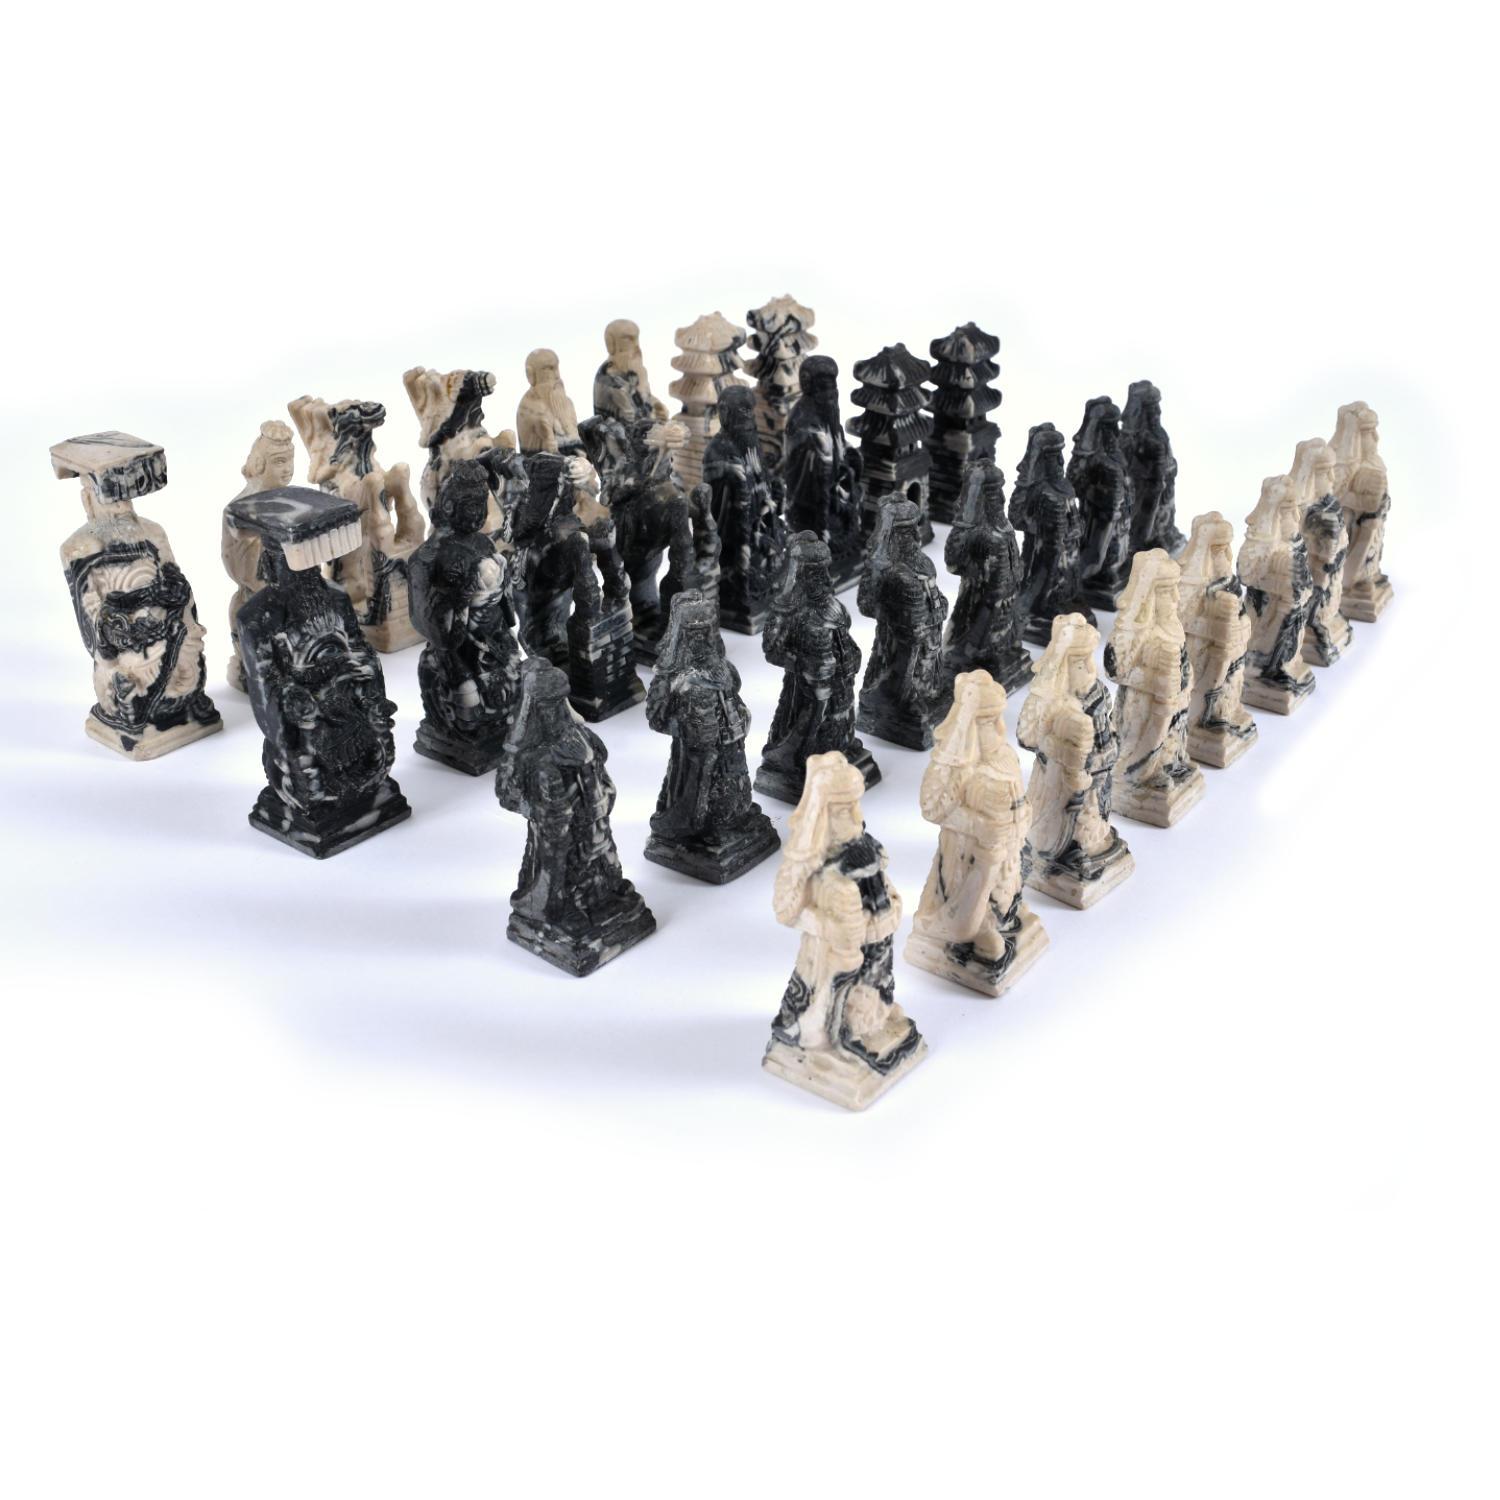 Exquisitely detailed set of vintage Chinese theme chess pieces carved in a stone-like resin. The standard 32-piece set features a group of black marbled and white marbled figures. The pieces are carved from a resin composite materials that looks and